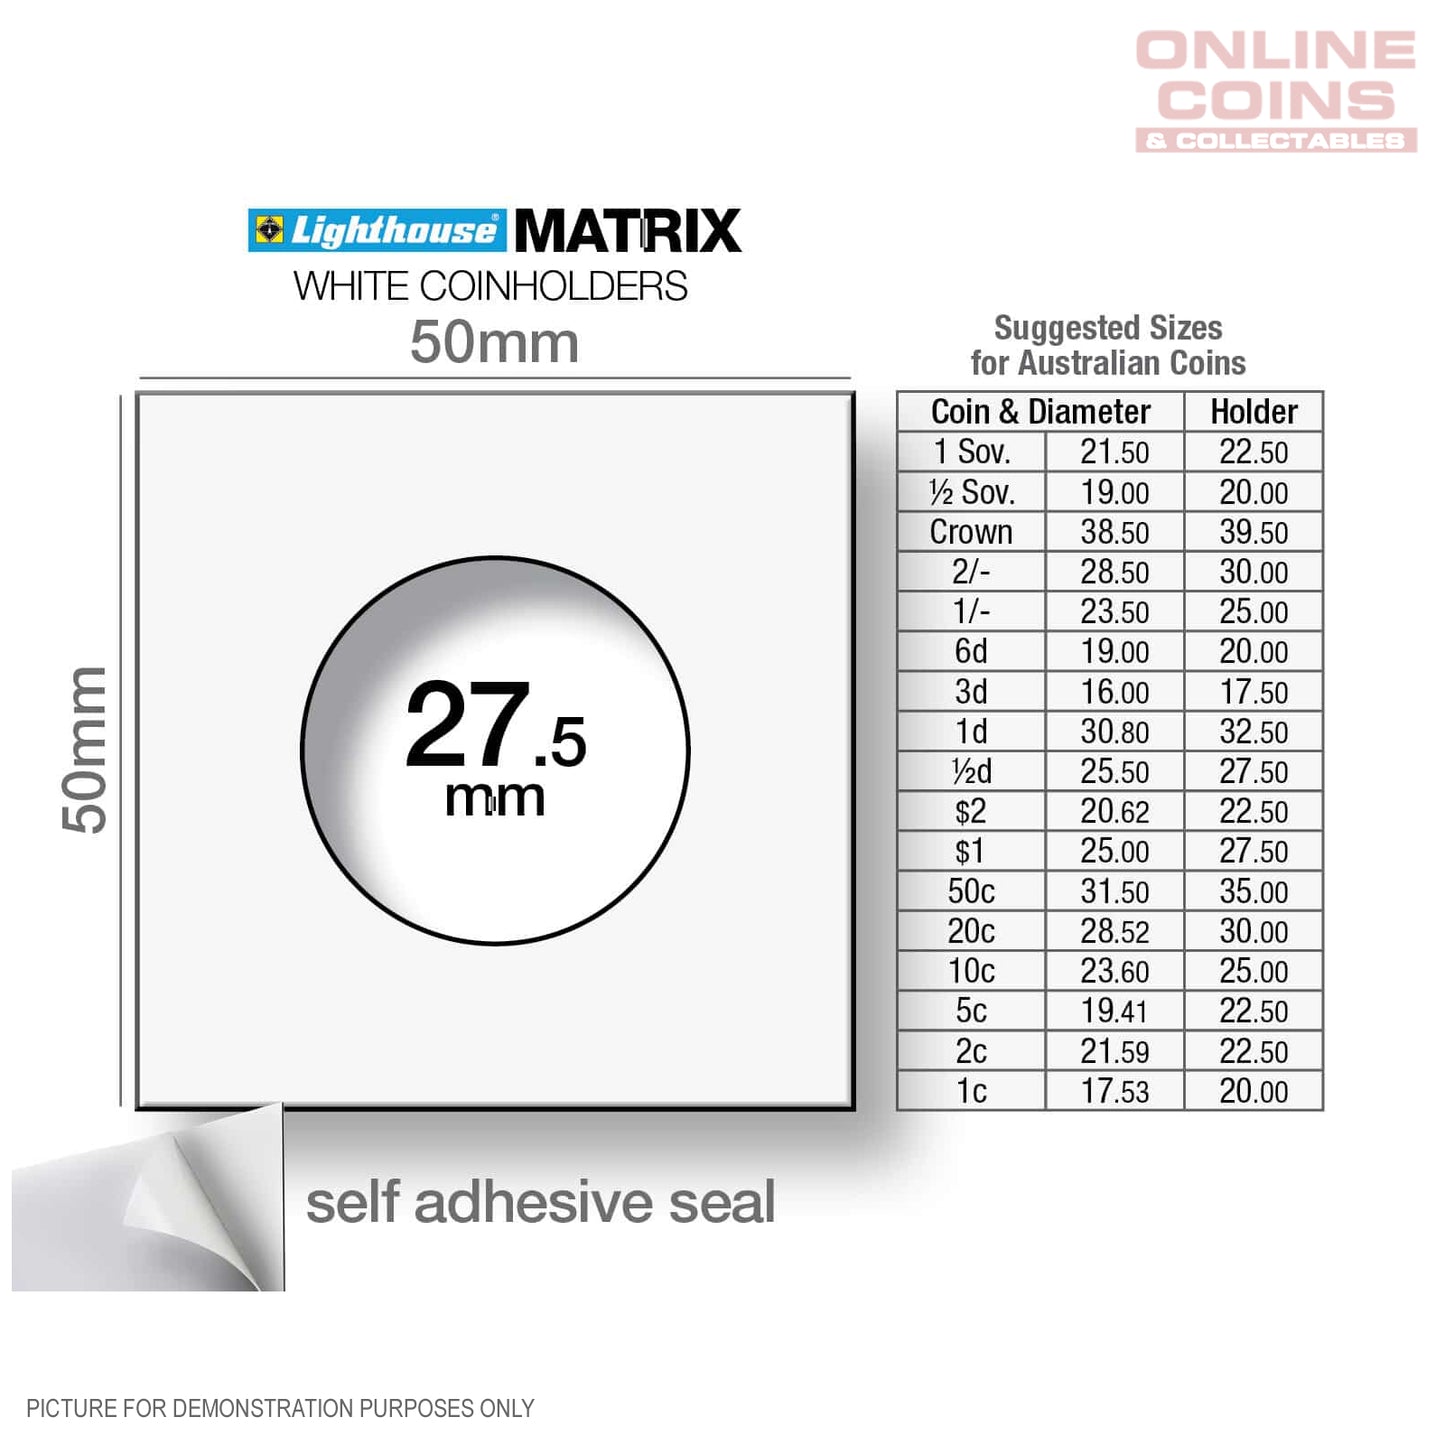 Lighthouse MATRIX WHITE 25mm Self Adhesive 2"x2" Coin Holders (Suitable For Australian 10c Coins And Shillings)